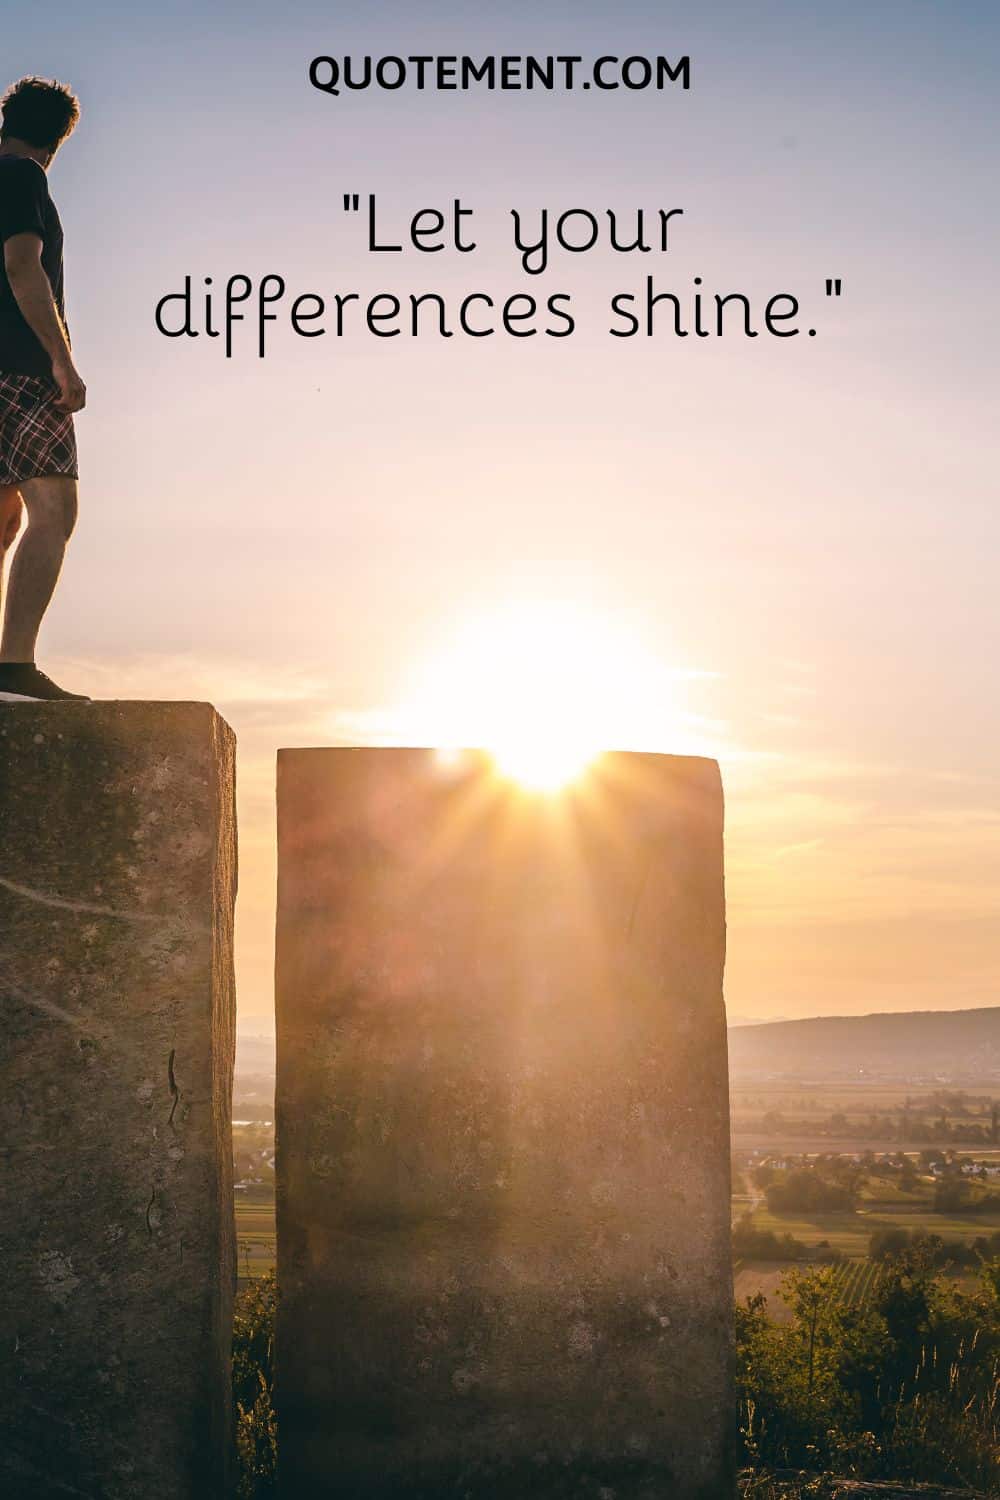 Let your differences shine